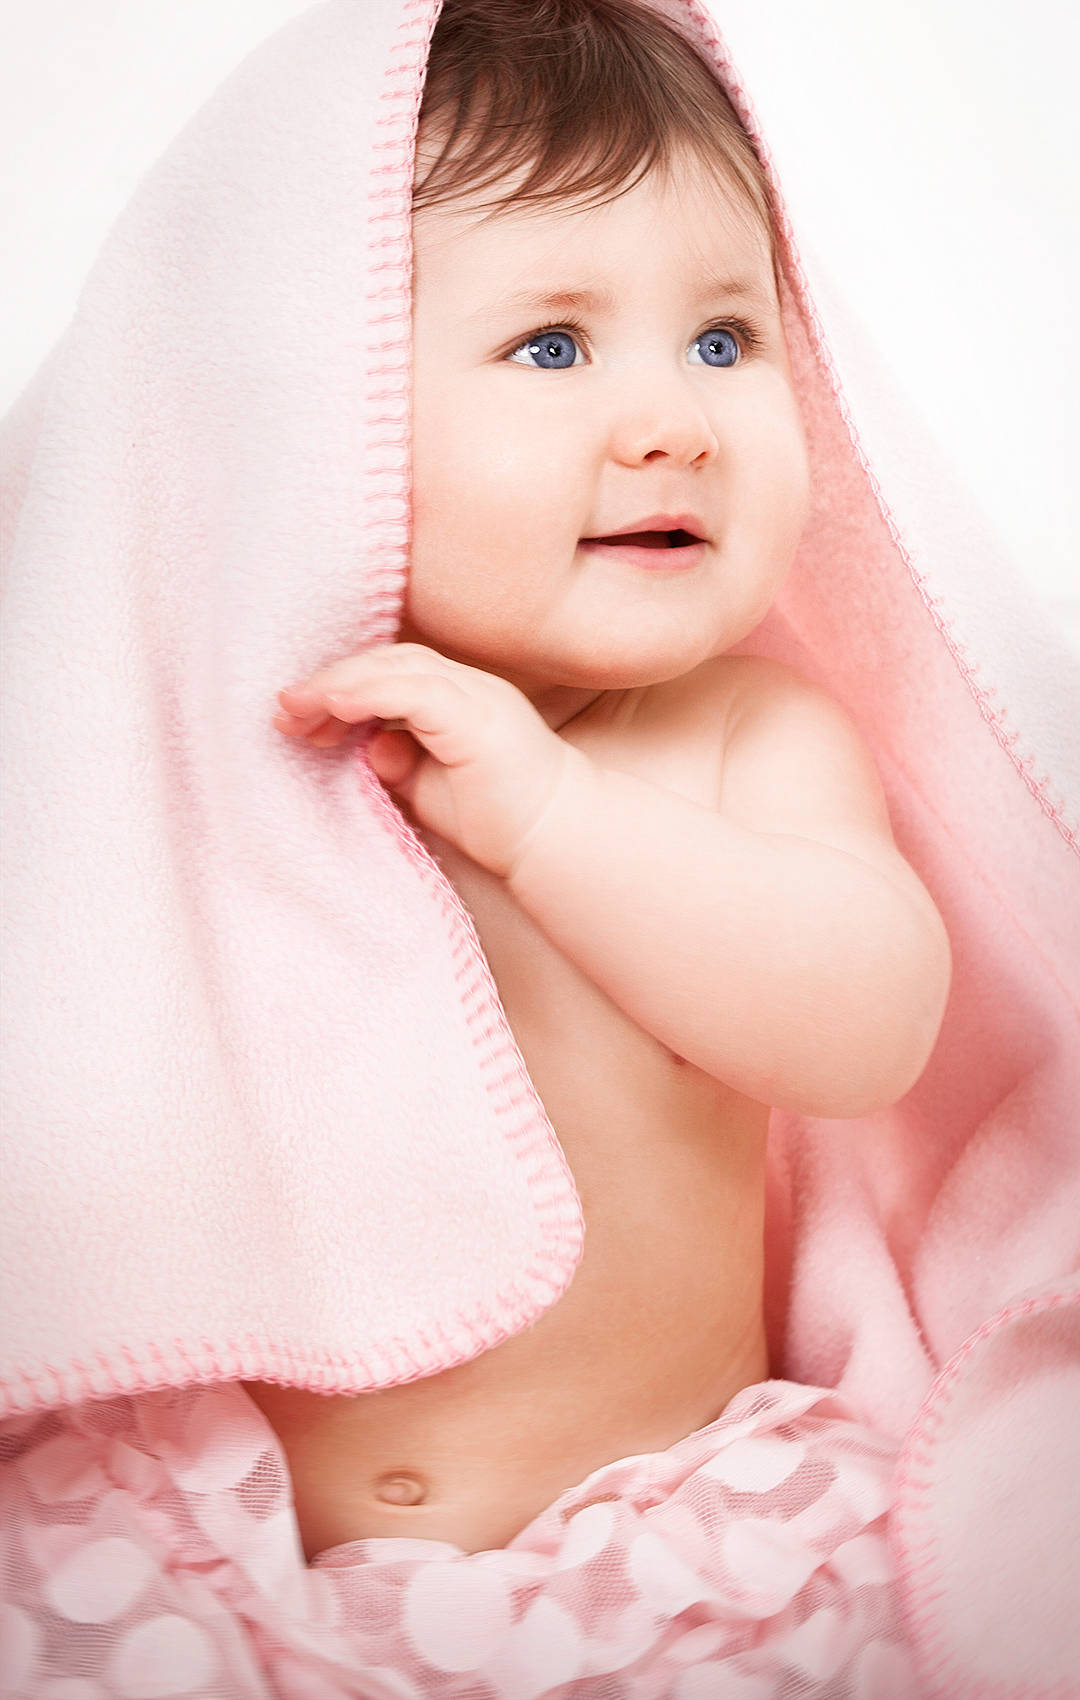 baby babies Young child photo cute toddler editorial